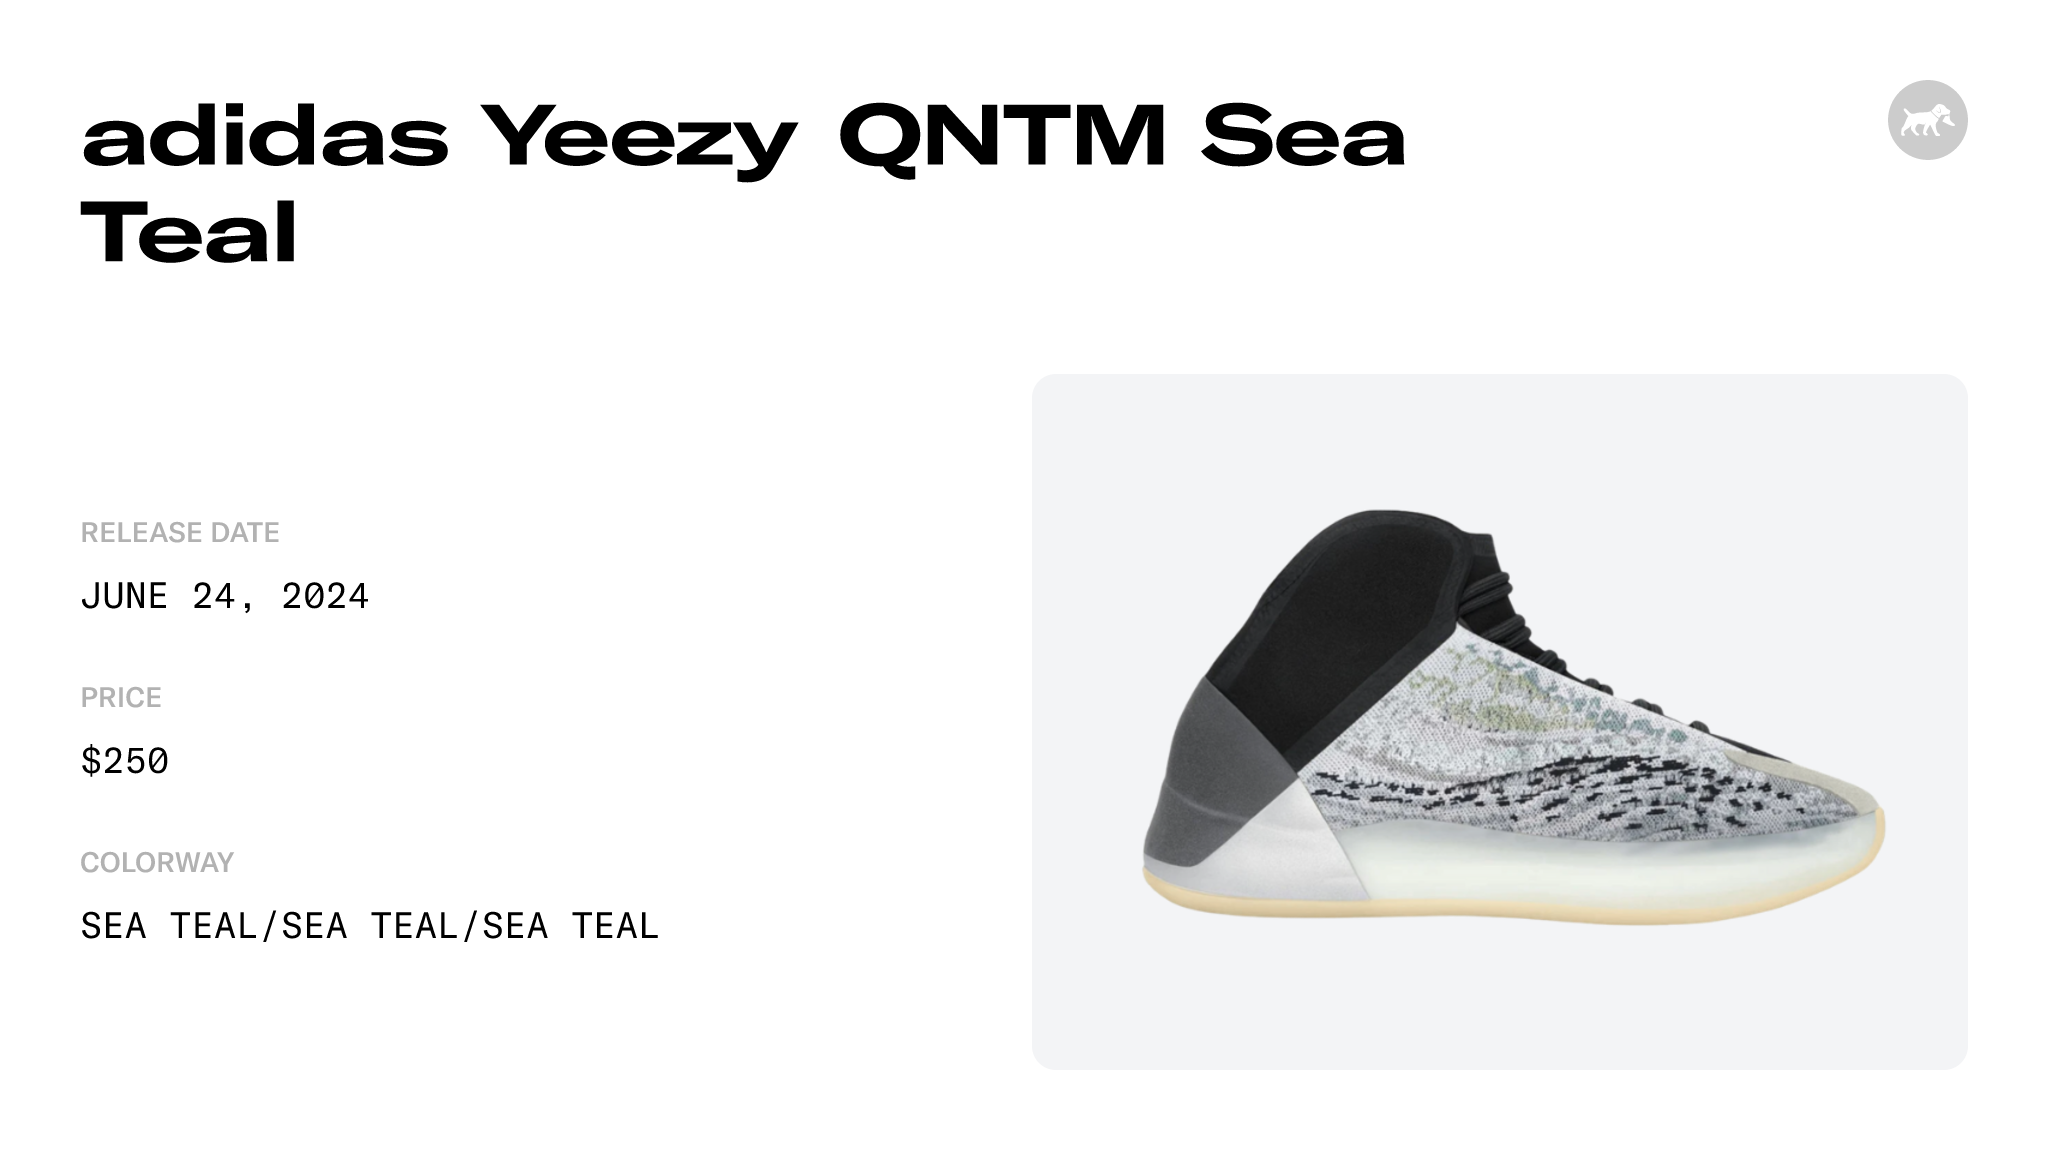 adidas Yeezy QNTM Sea Teal - GY7926 Raffles and Release Date